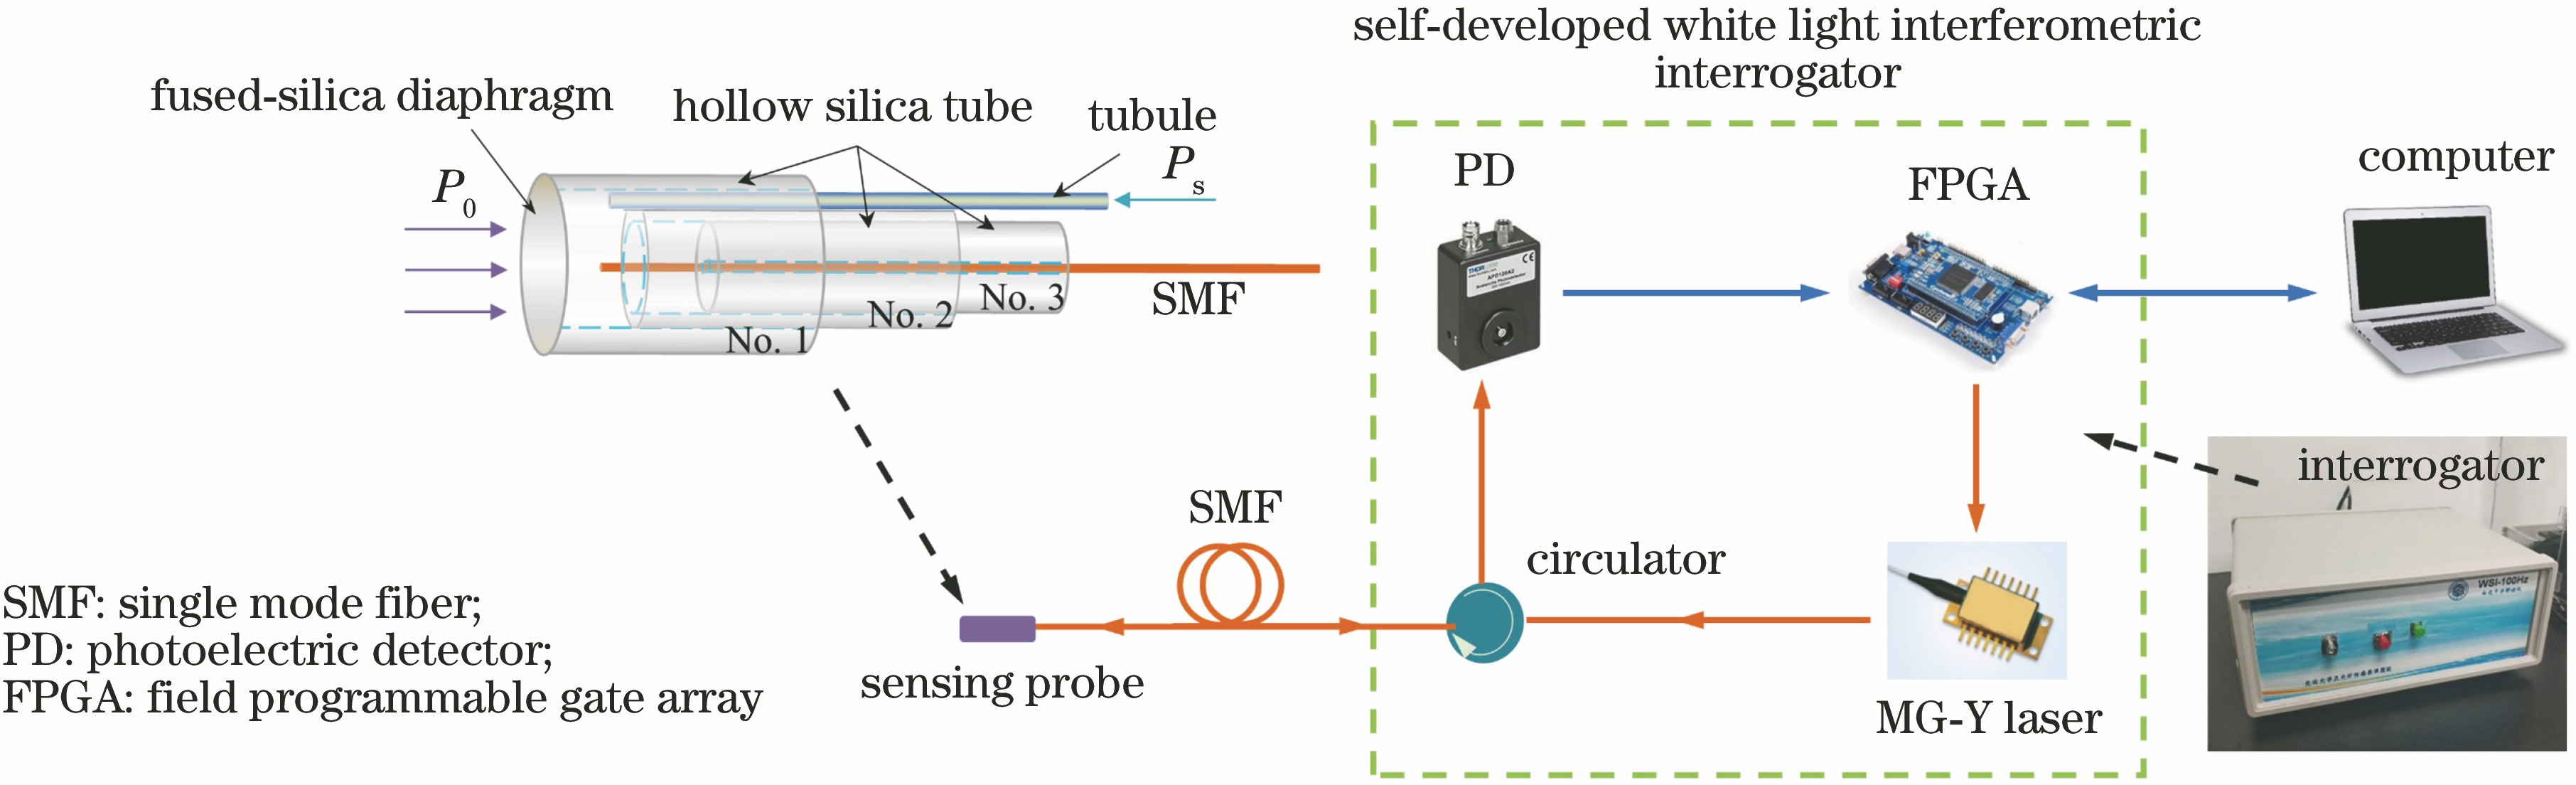 Schematic of differential-pressure fiber-optic airflow sensing system based on white light interferometric technology